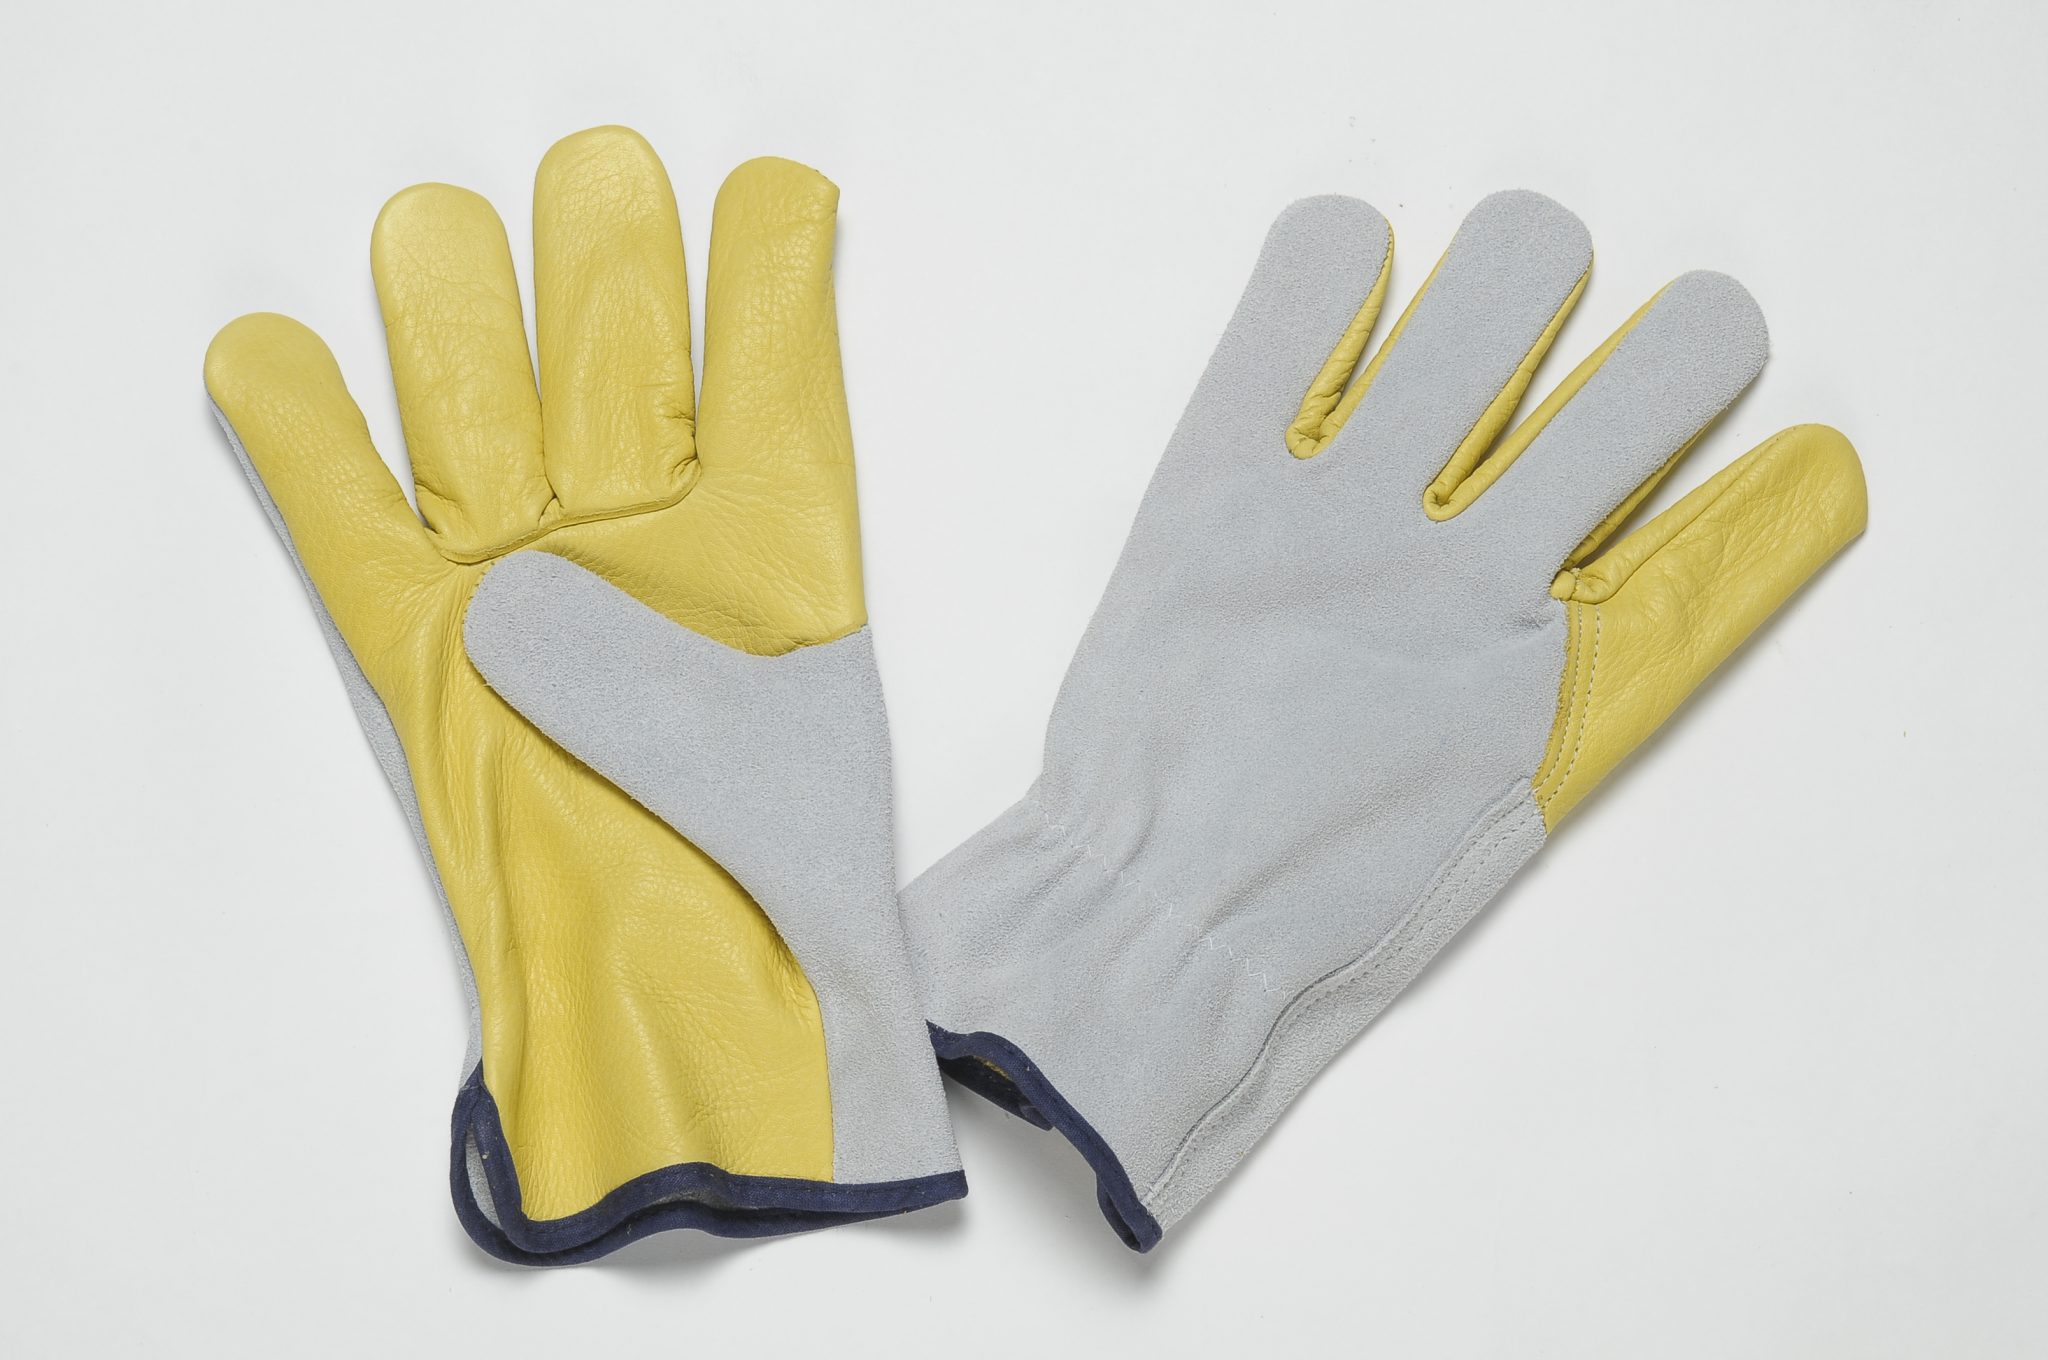 YELLOW LEATHER GLOVES WITH GRAIN ON PALM, THUMB AND FOREFINGER, NATURAL SPLIT BACK, ADJUSTABLE ELASTIC IN THE WRIST, COLOURED BINDING